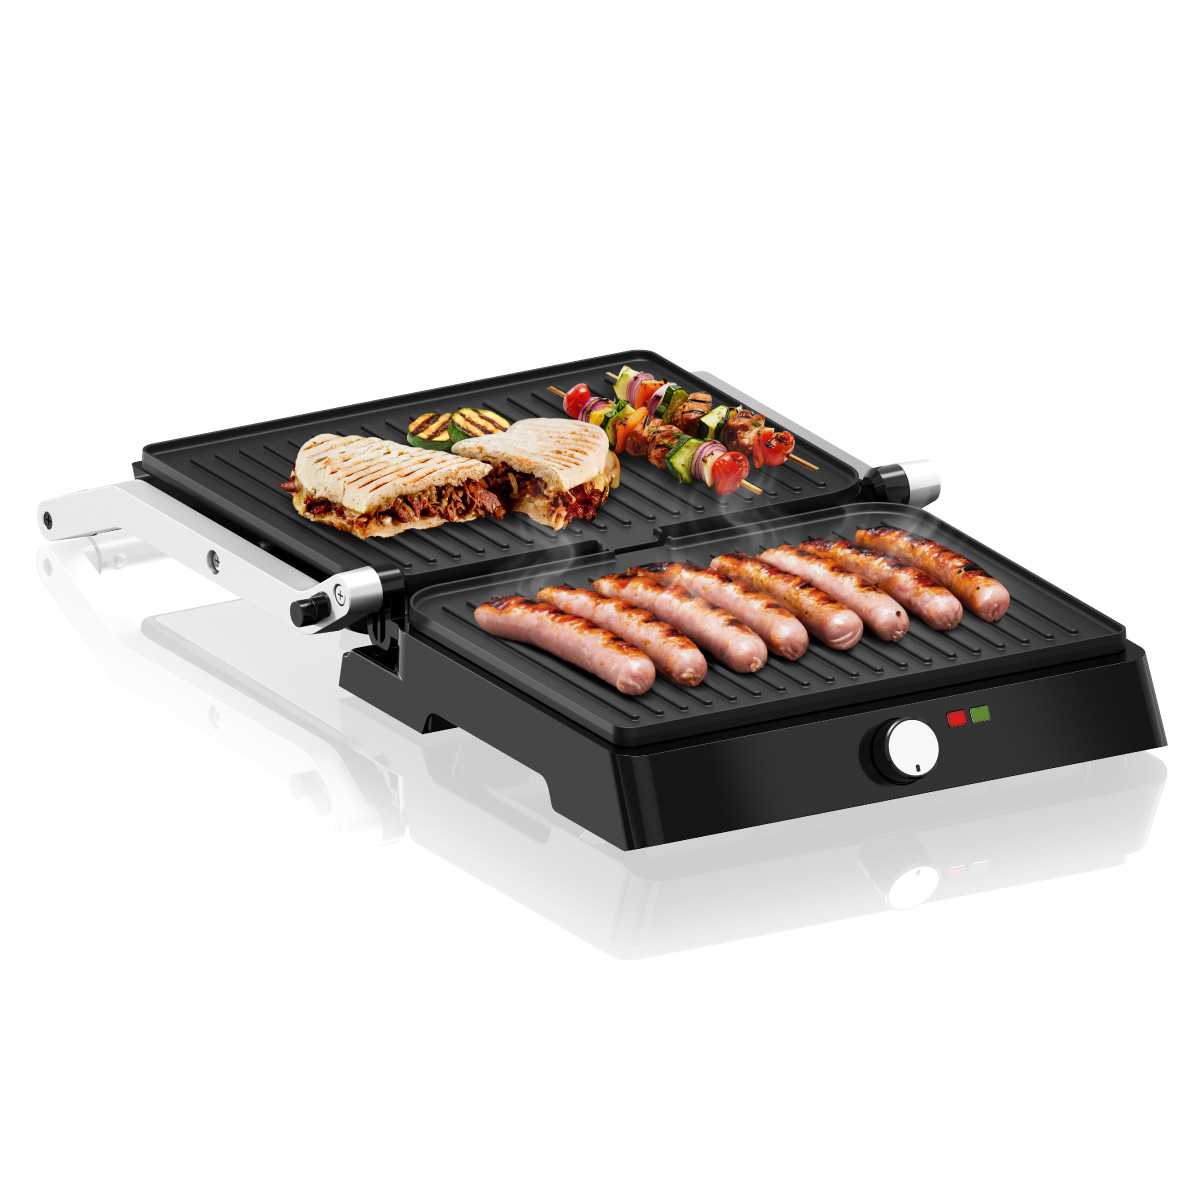 Intense 50 extended electric grill